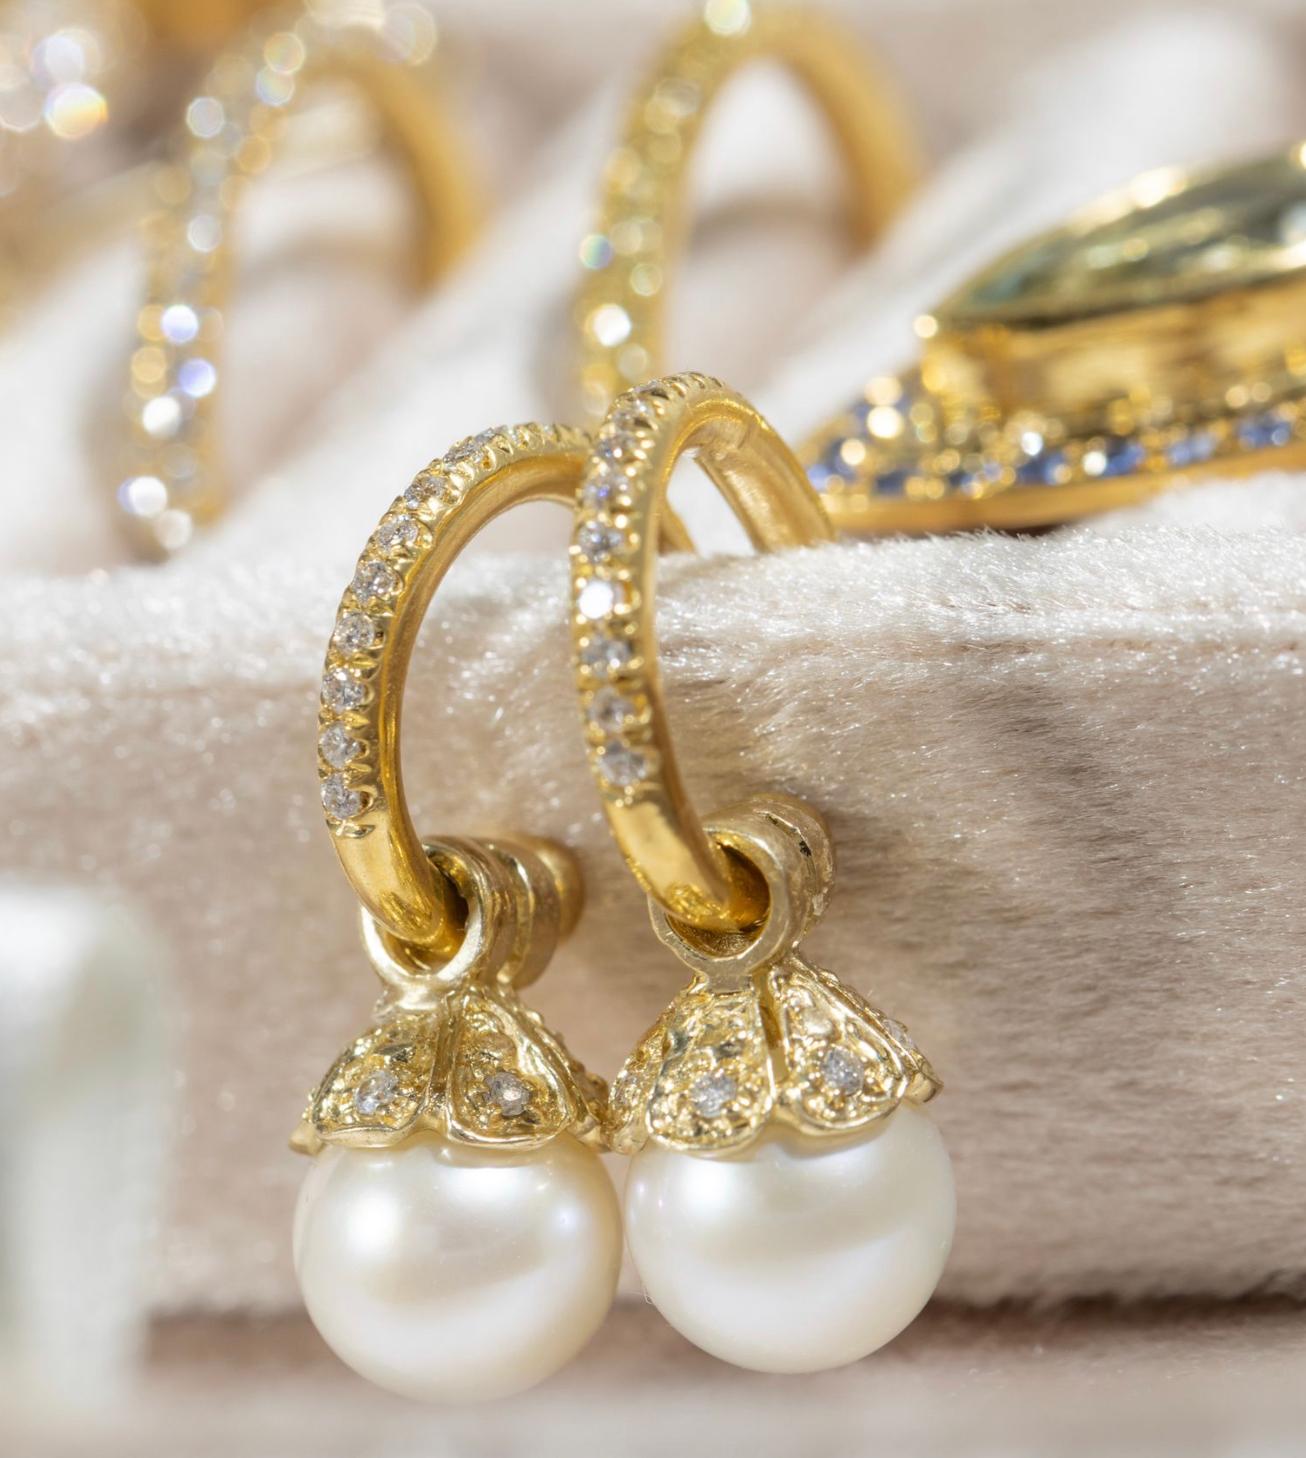 Brilliant Cut Paris & Lily, 22k Gold, Diamond Hoop Earrings with Removable Pearl Pendants For Sale